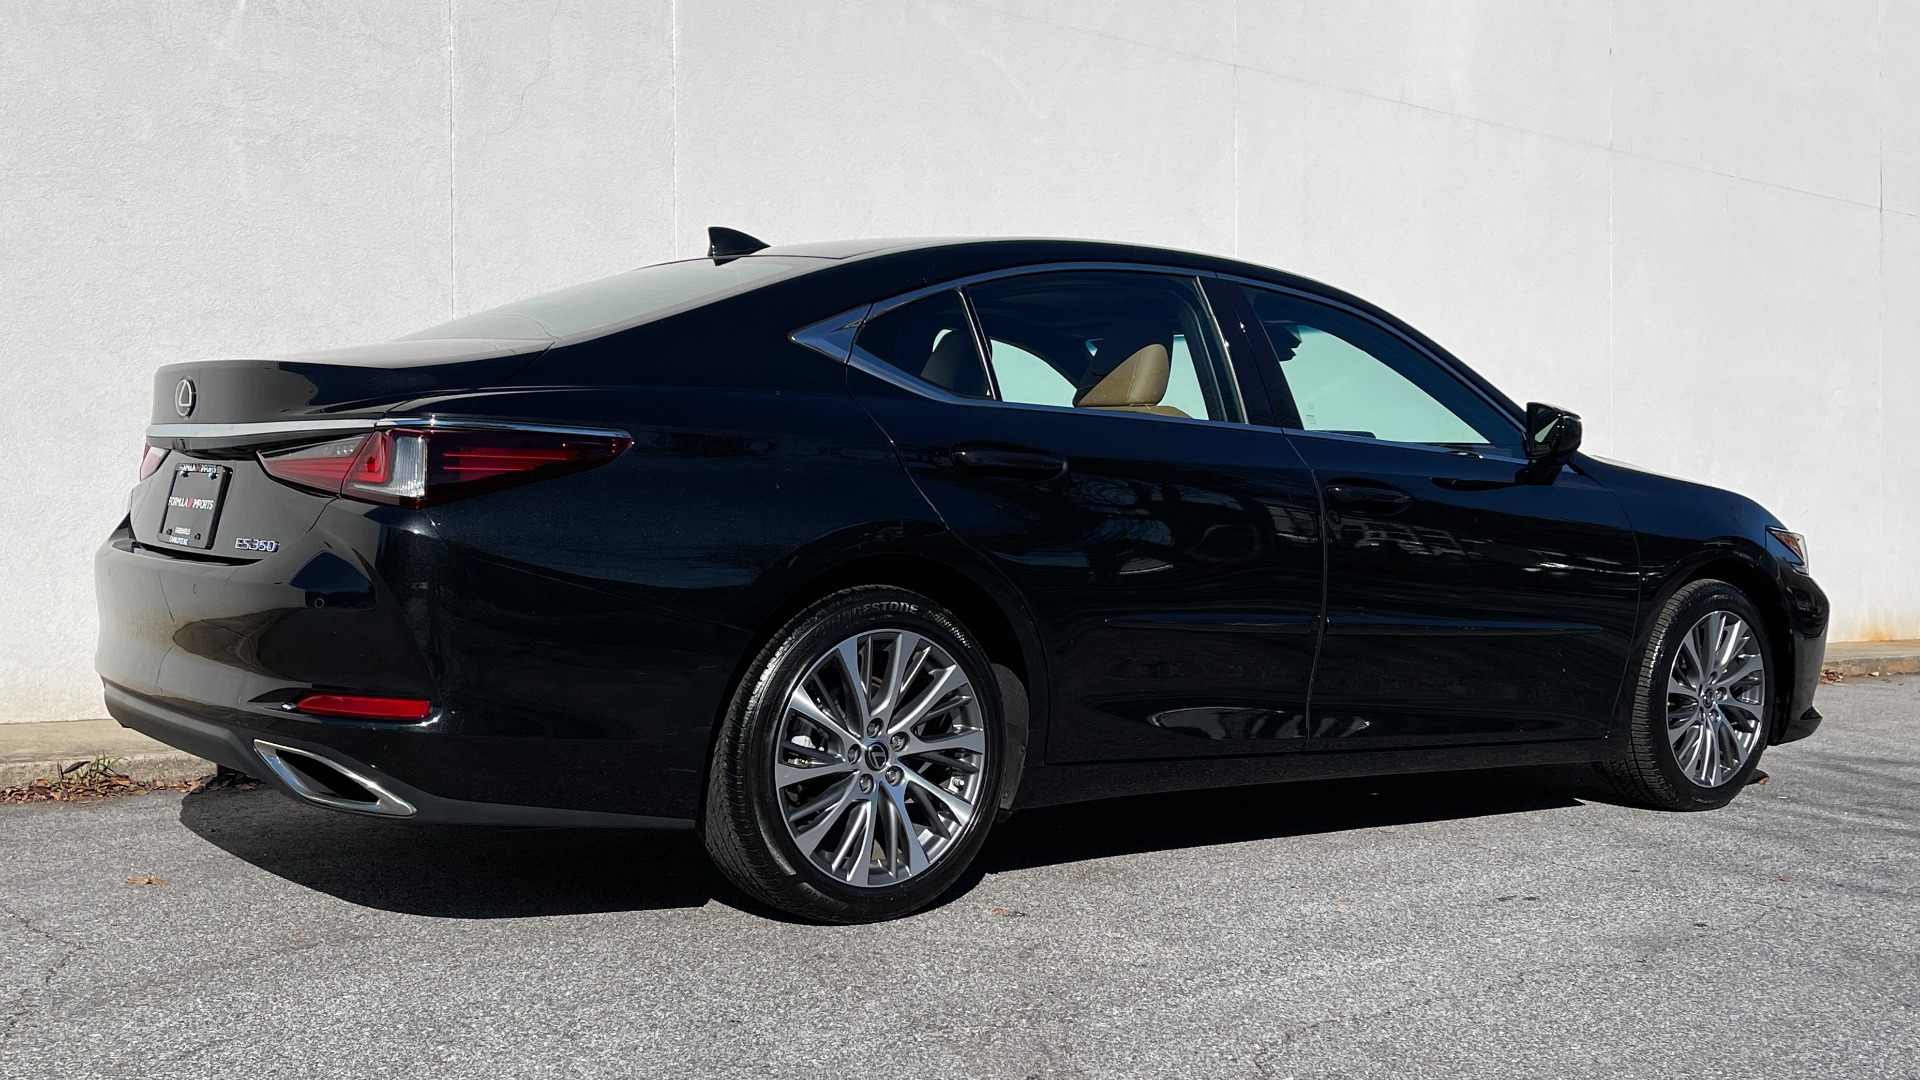 Used 2020 Lexus ES 350 PREMIUM 3.5L SEDAN / BSM / MEMORY / SUNROOF / HTD STS / REARVIEW for sale $40,995 at Formula Imports in Charlotte NC 28227 7